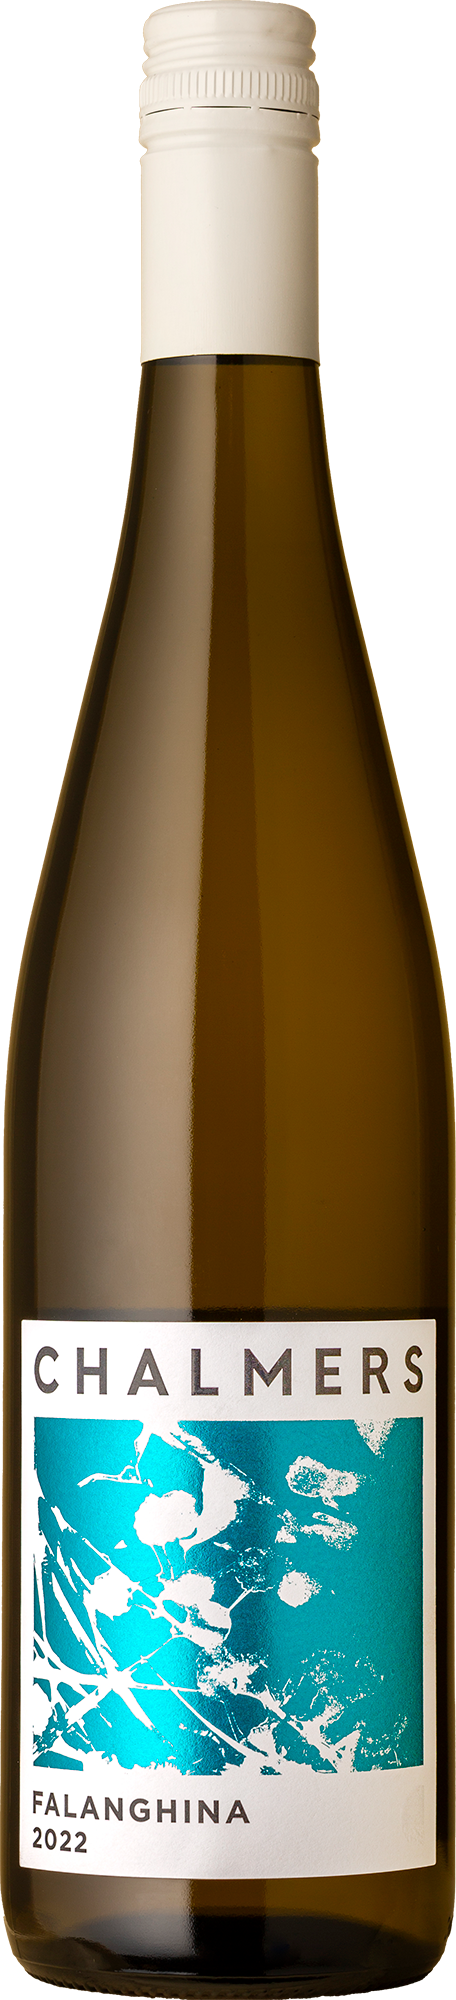 Chalmers - Falanghina 2022 White Wine